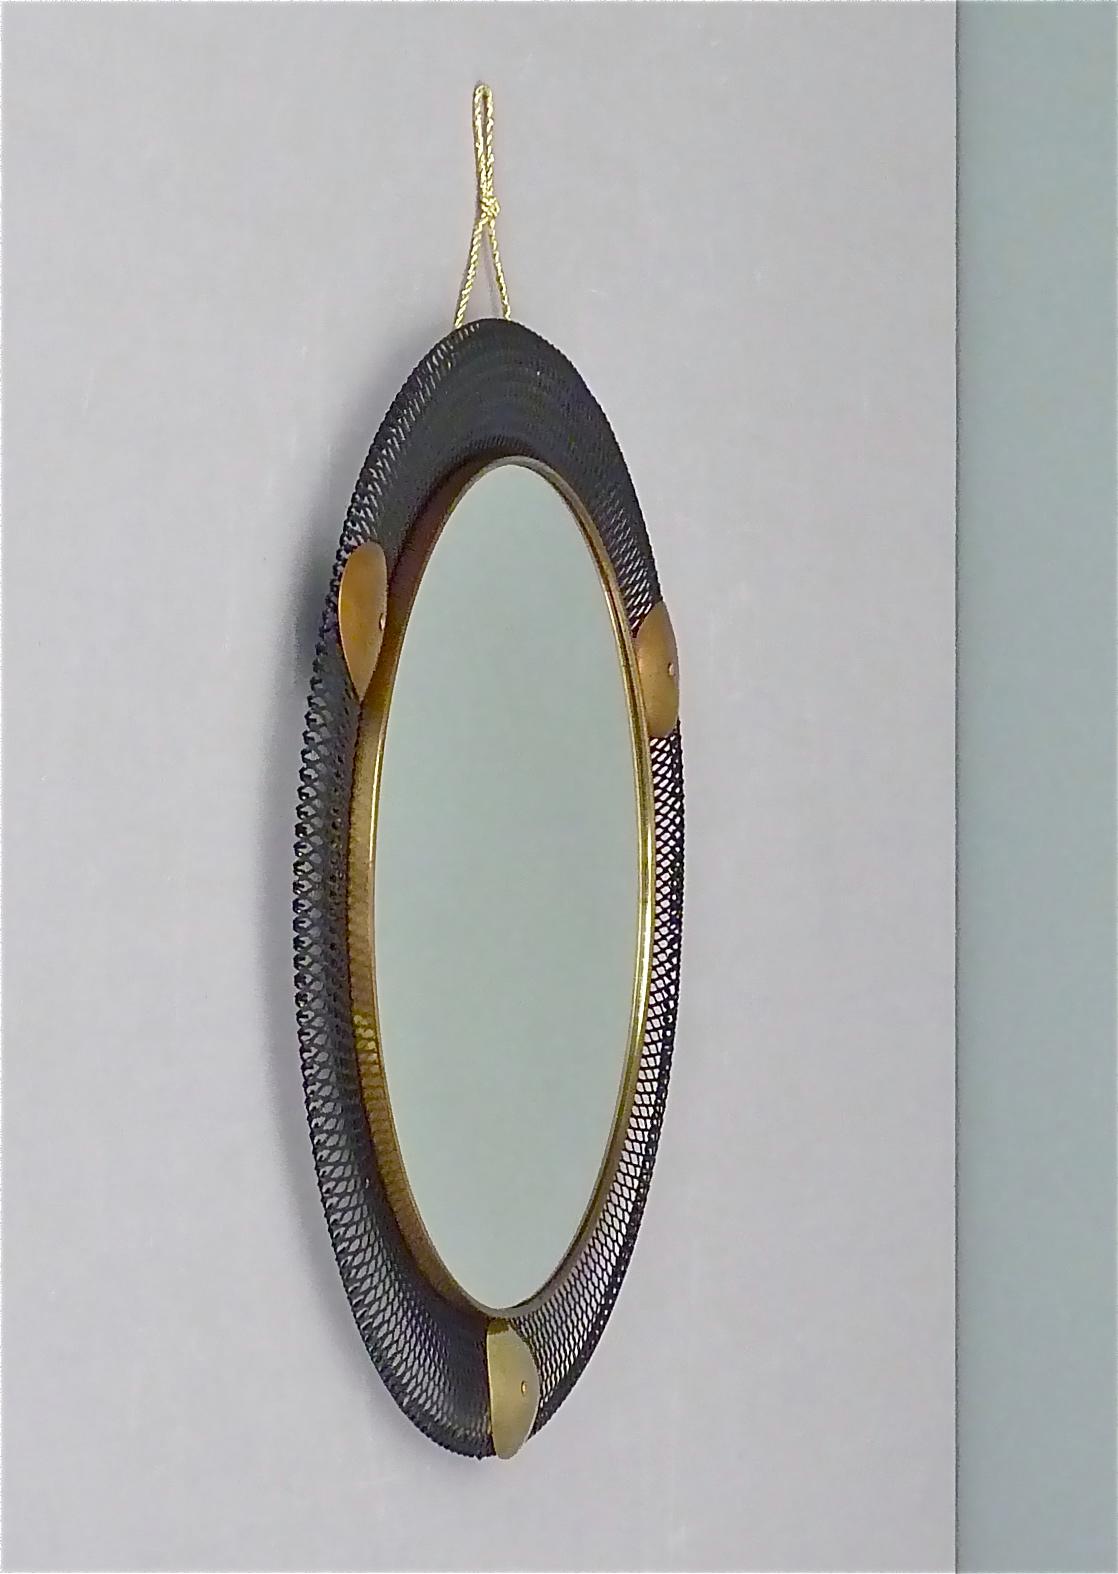 Round Black Midcentury Wall Mirror Brass Stretched Metal 1955 Mategot Biny Style For Sale 3